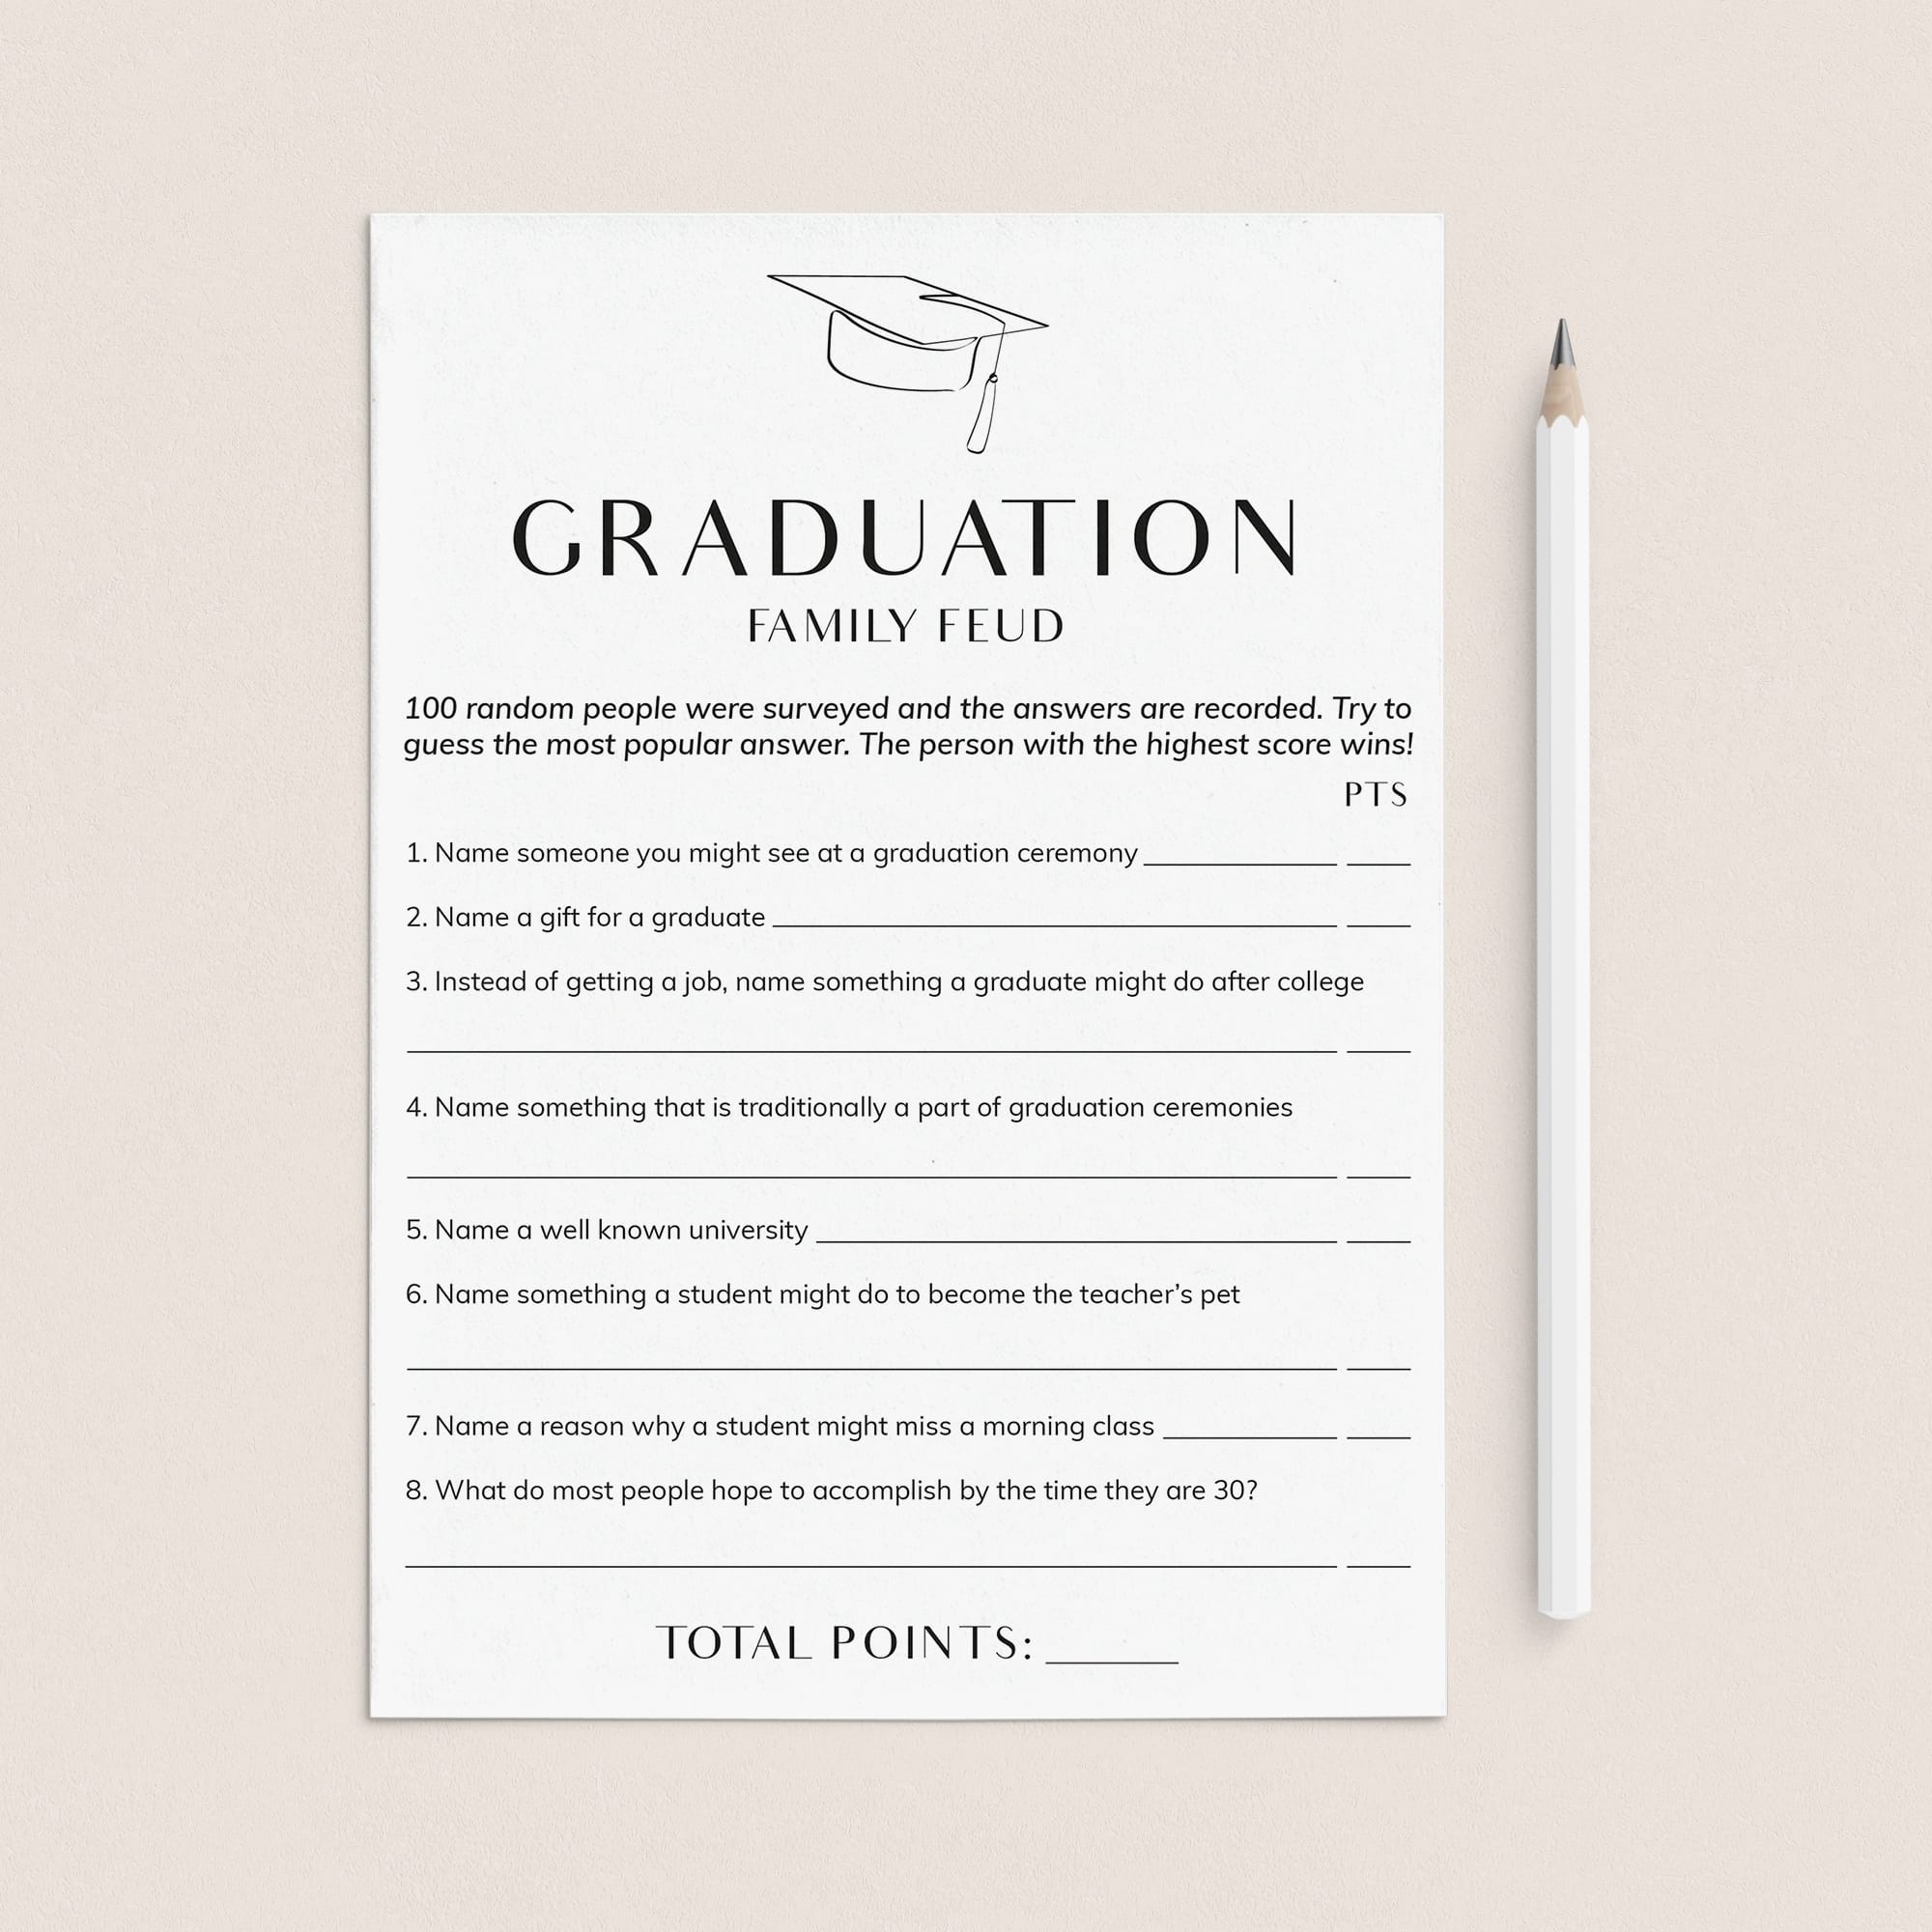 Graduation Family Feud with Answer Key Printable by LittleSizzle